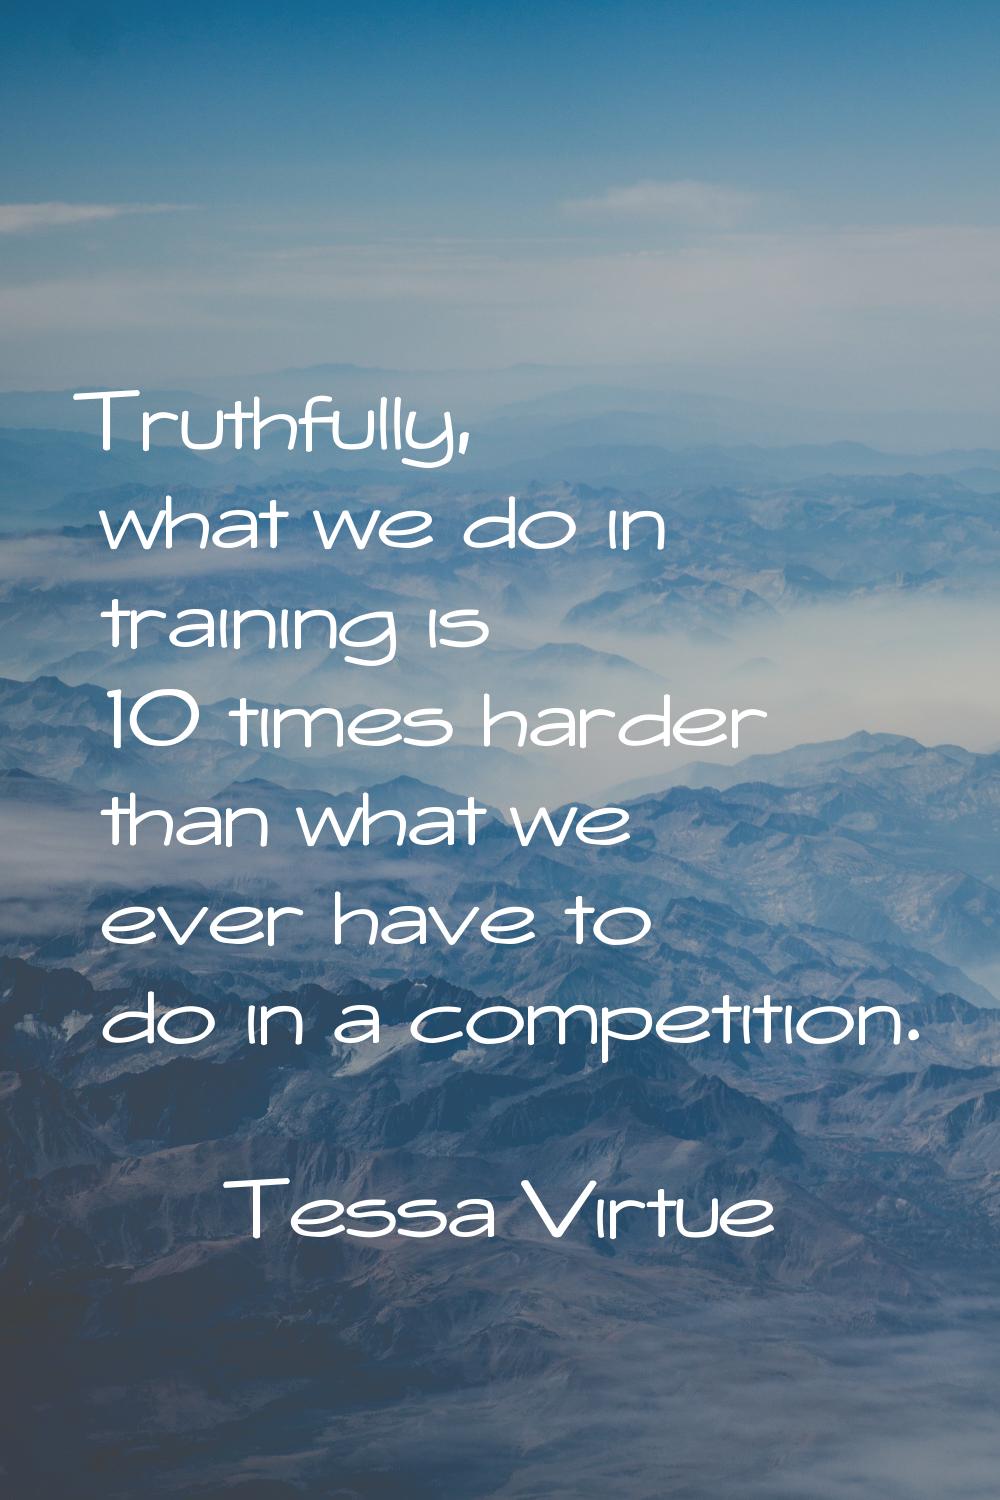 Truthfully, what we do in training is 10 times harder than what we ever have to do in a competition